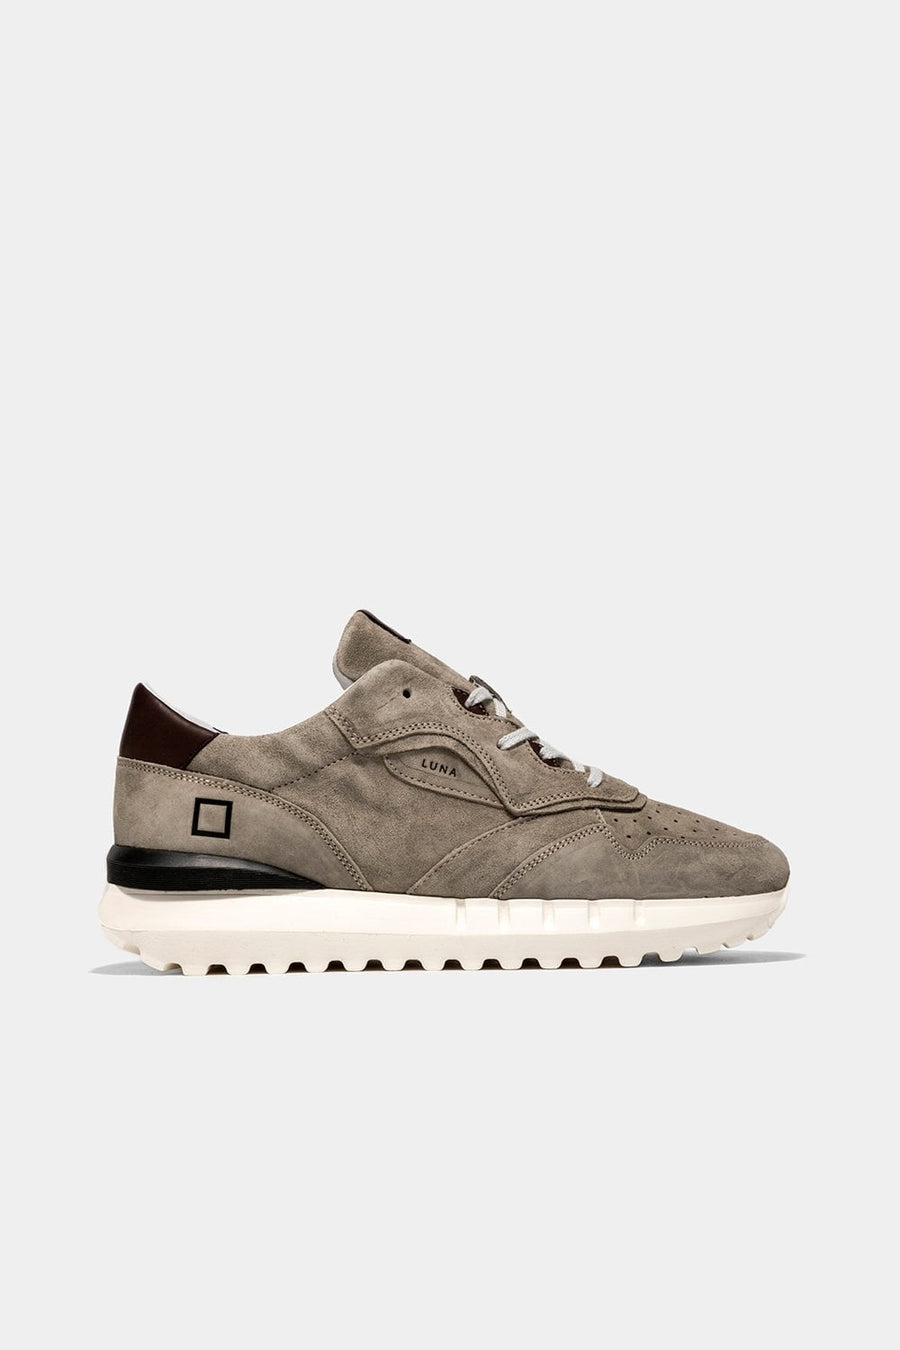 Buy the D.A.T.E. Luna Sneaker in Stone Sage at Intro. Spend £50 for free UK delivery. Official stockists. We ship worldwide.